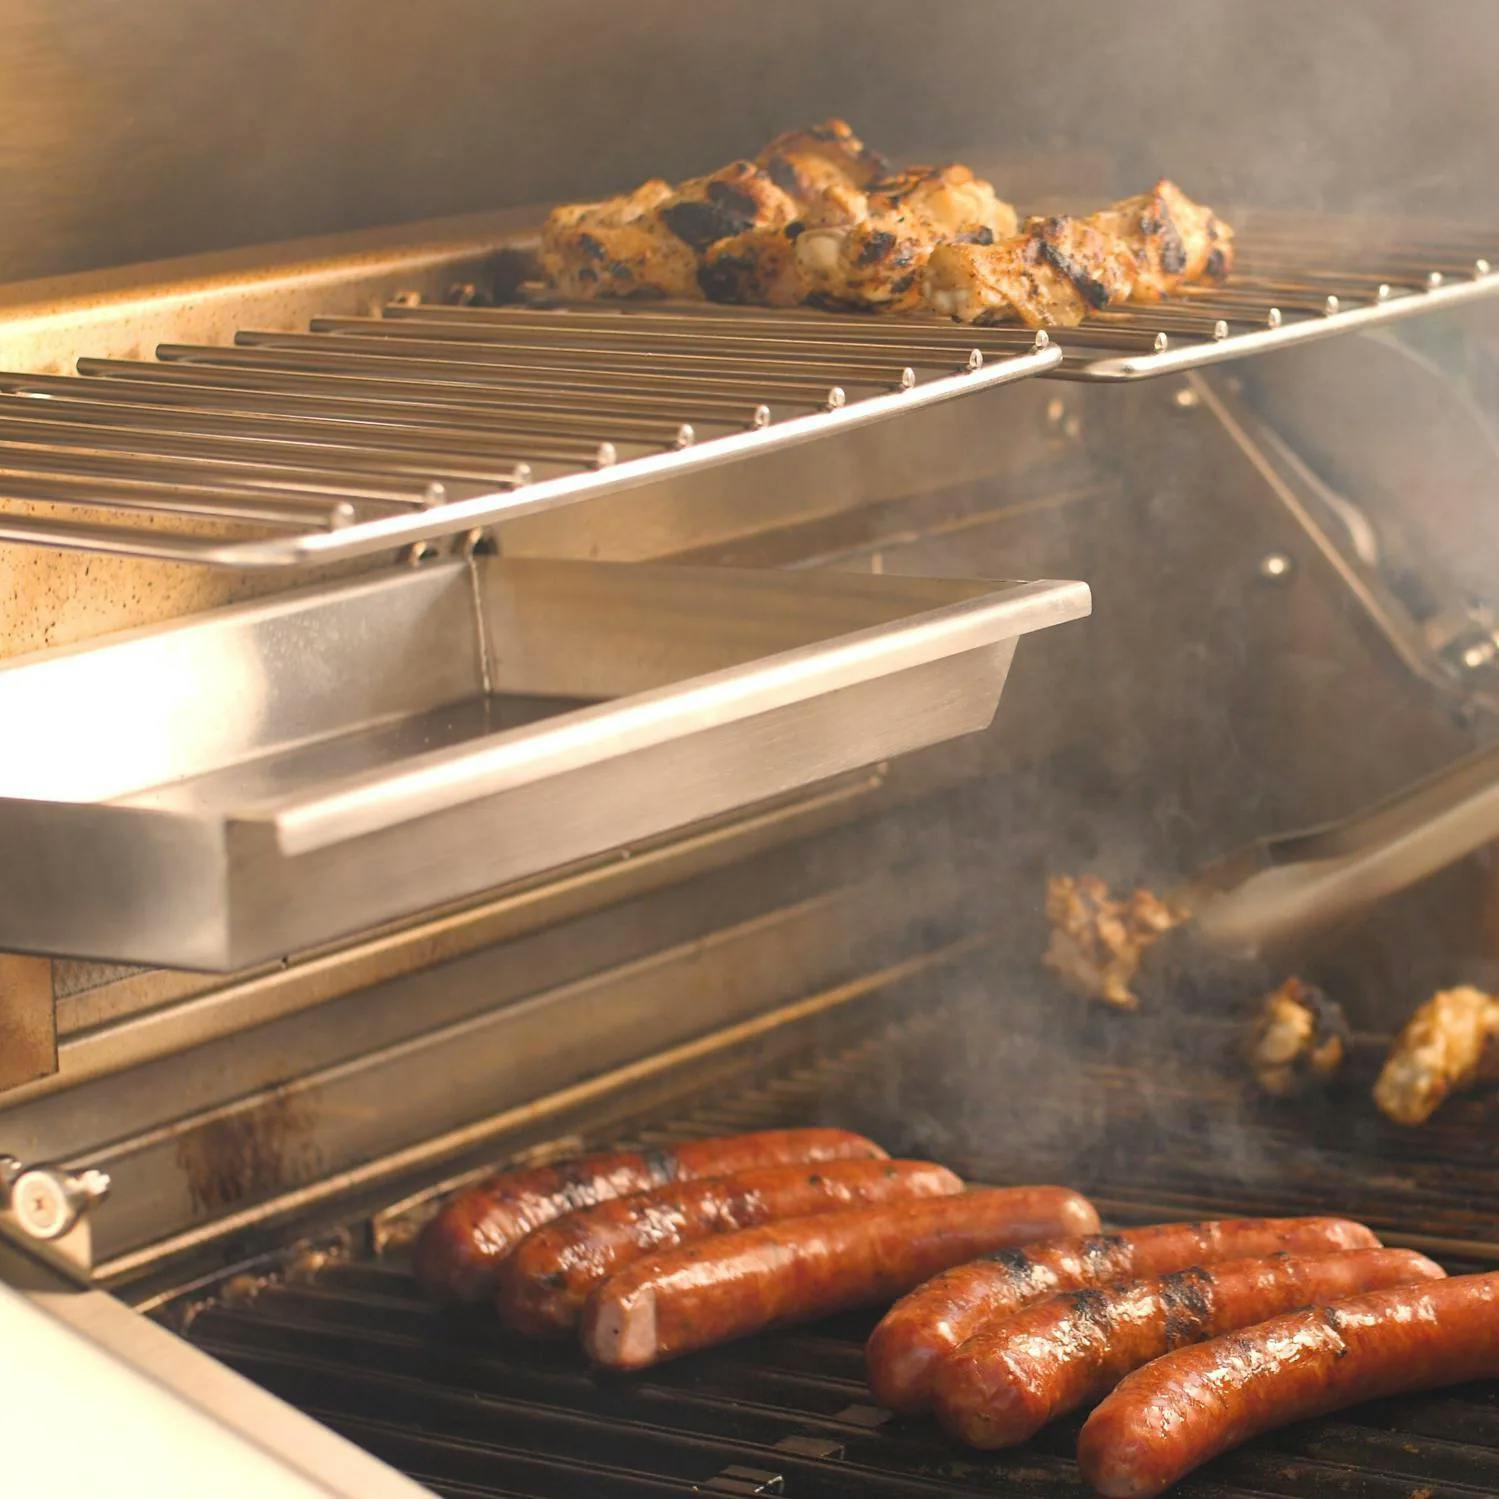 DCS Series 9 Evolution Built-in Gas Grill with Rotisserie